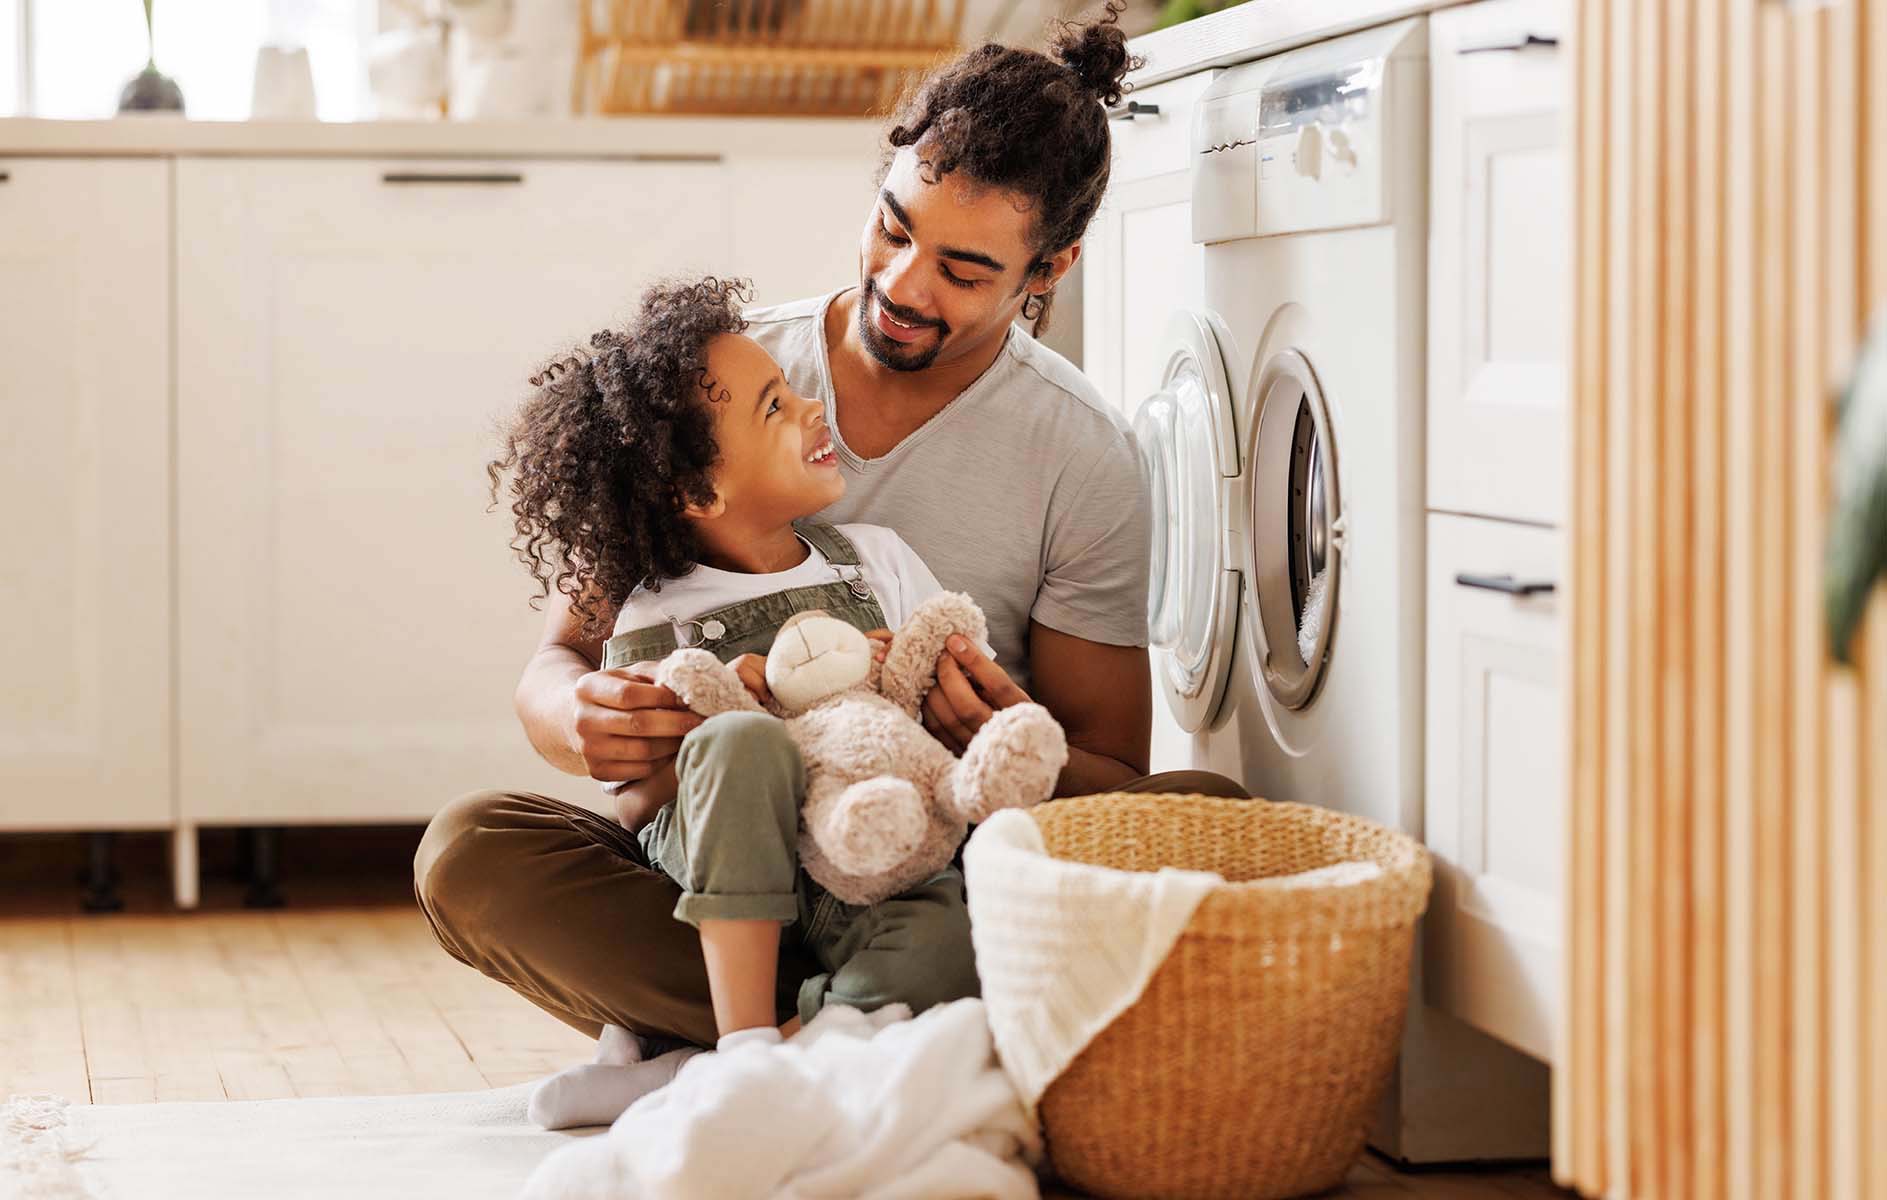 A man and a young child with a teddy bear smile at each other, sitting by a washing machine